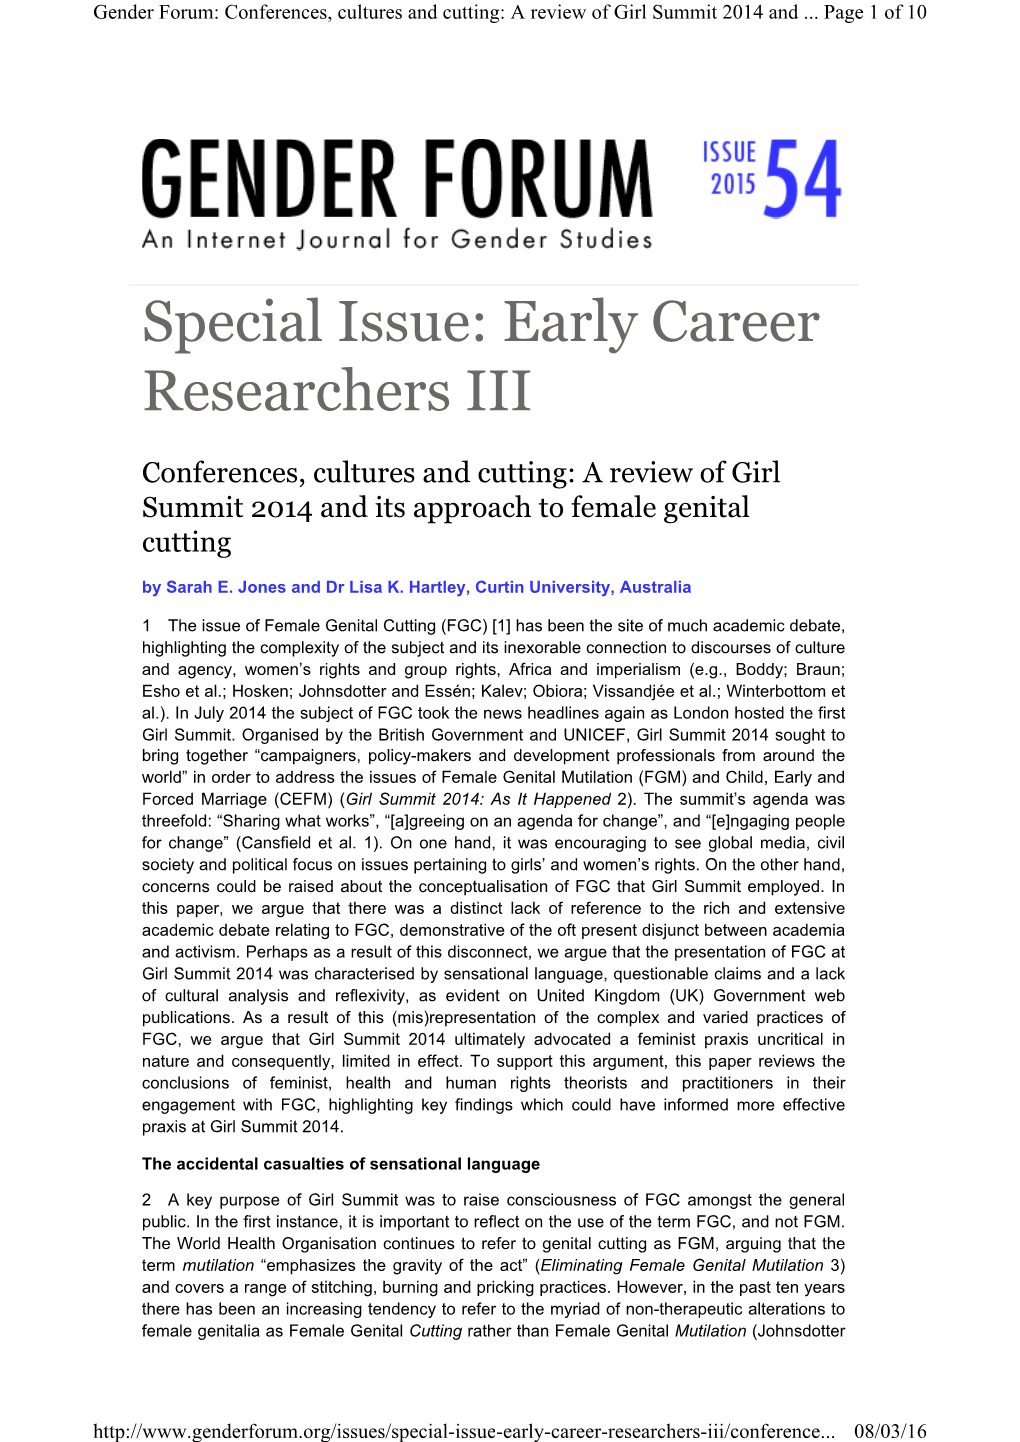 Special Issue: Early Career Researchers III